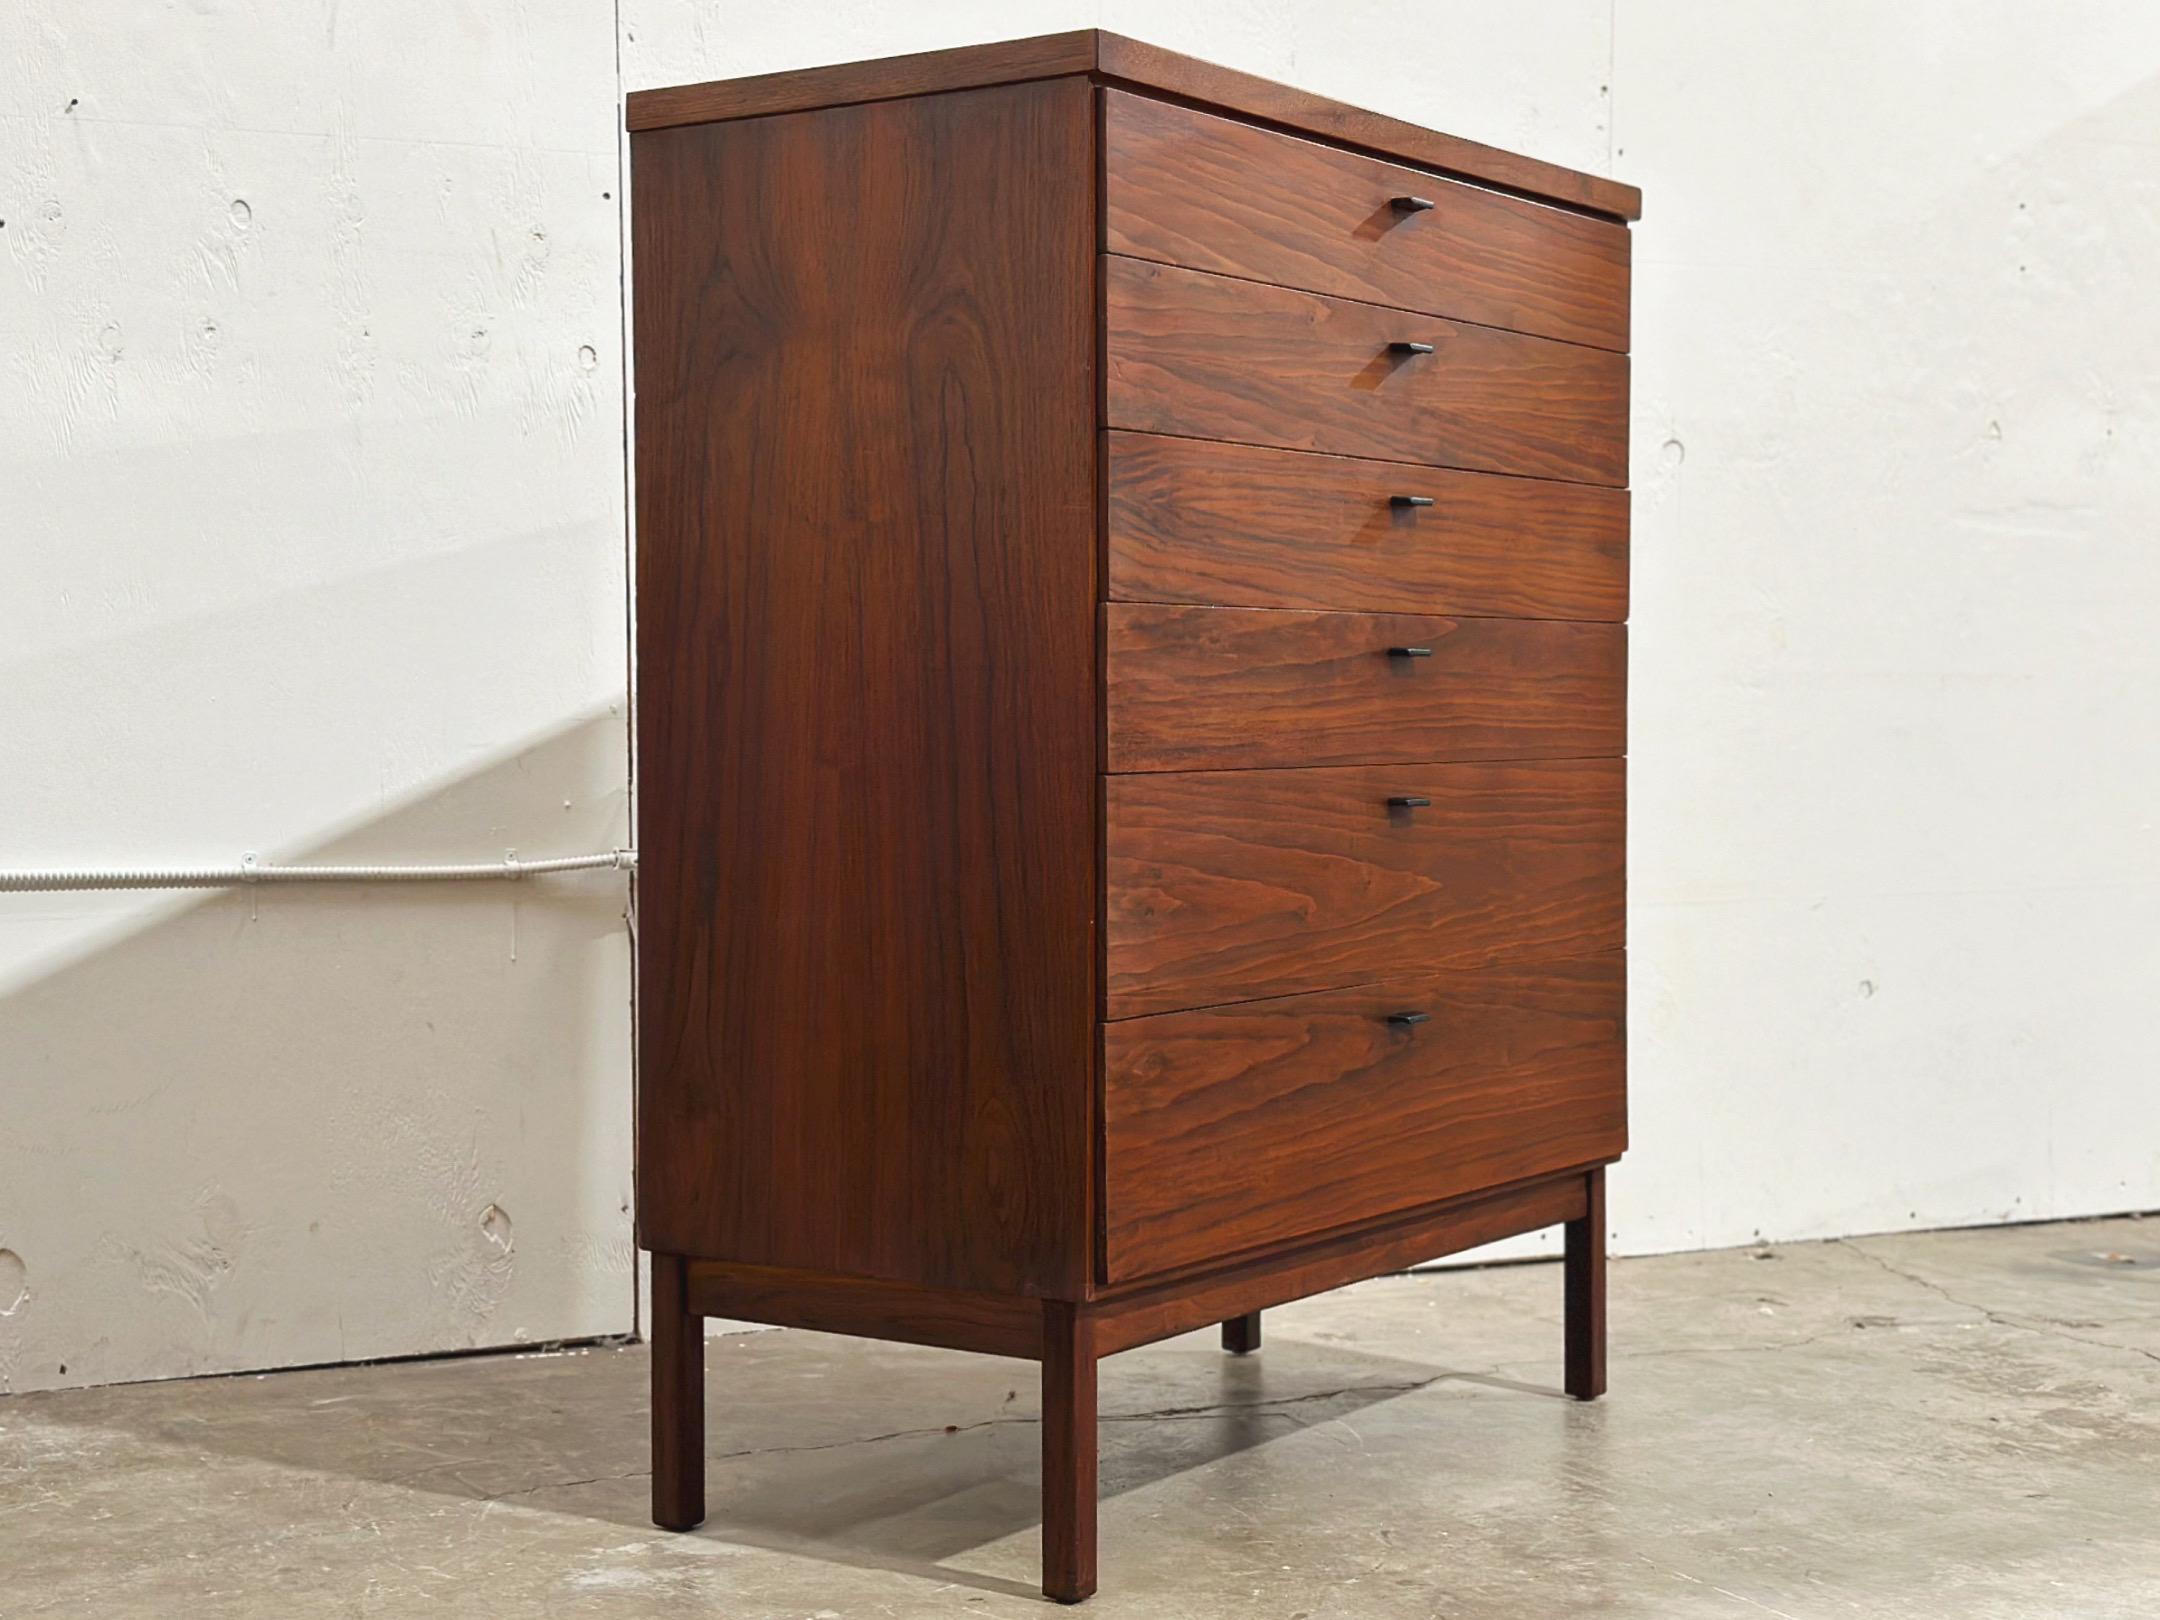 American Midcentury Dresser - Jack Cartwright - Founders Patterns 10 - Tall Highboy Chest